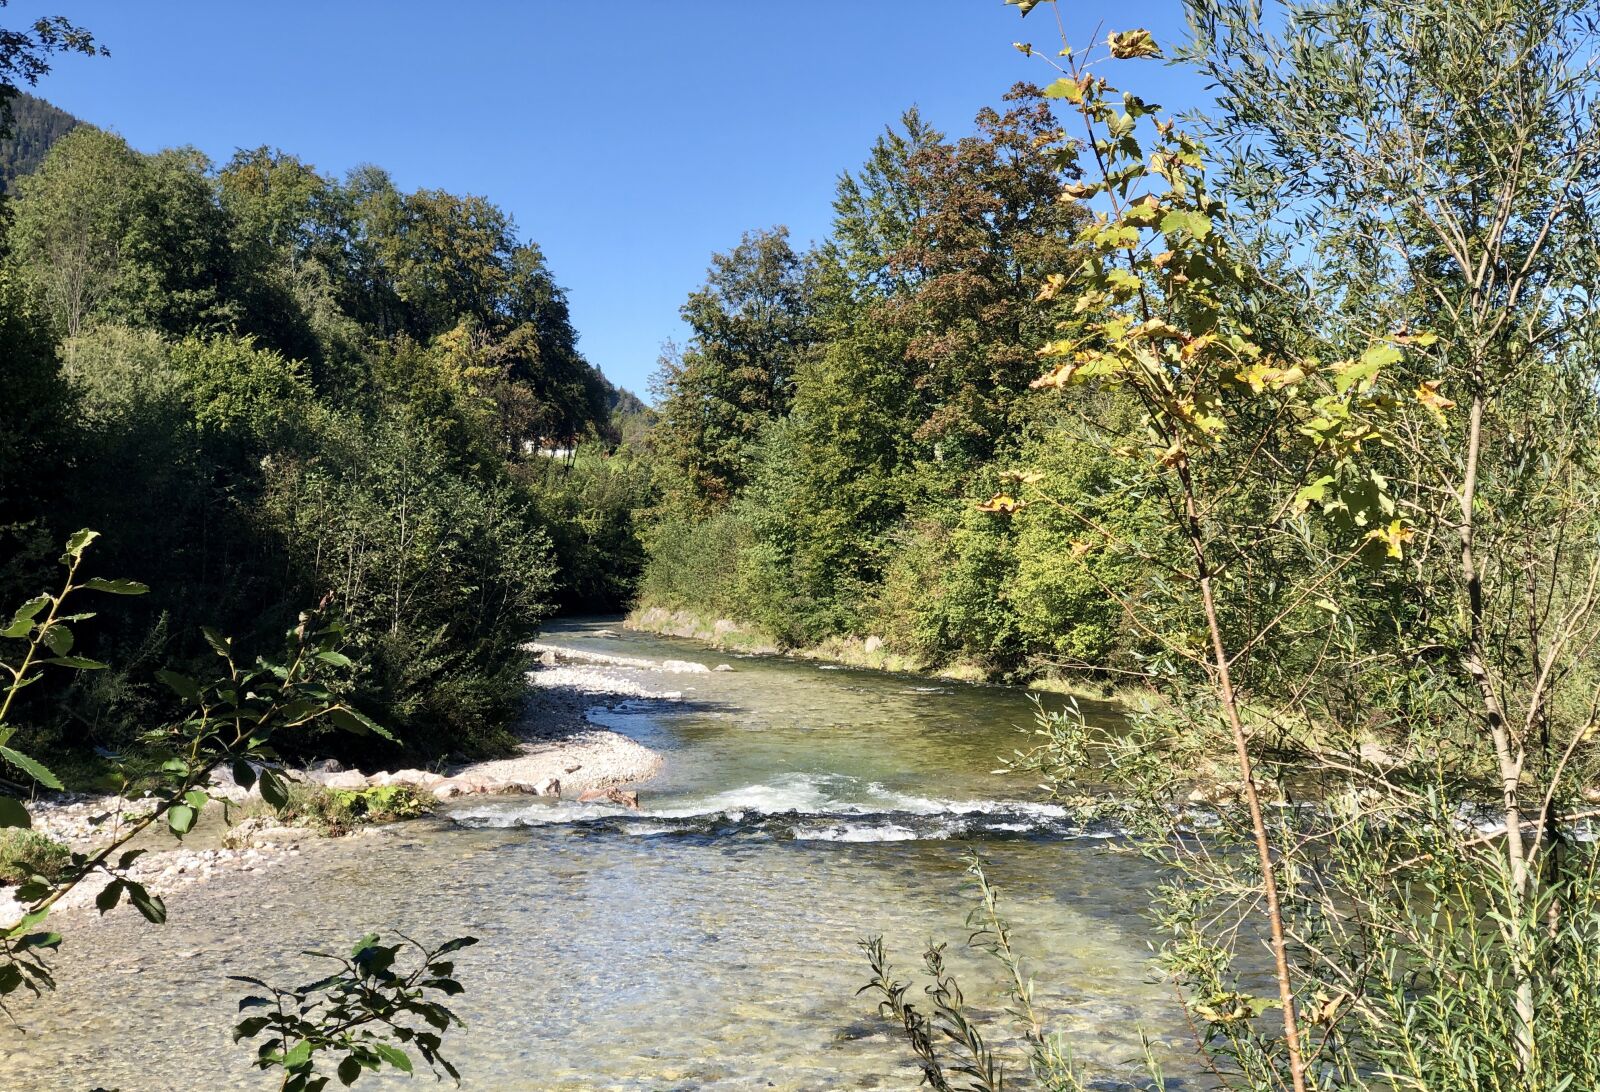 iPhone X back dual camera 6mm f/2.4 sample photo. River, bank, nature photography